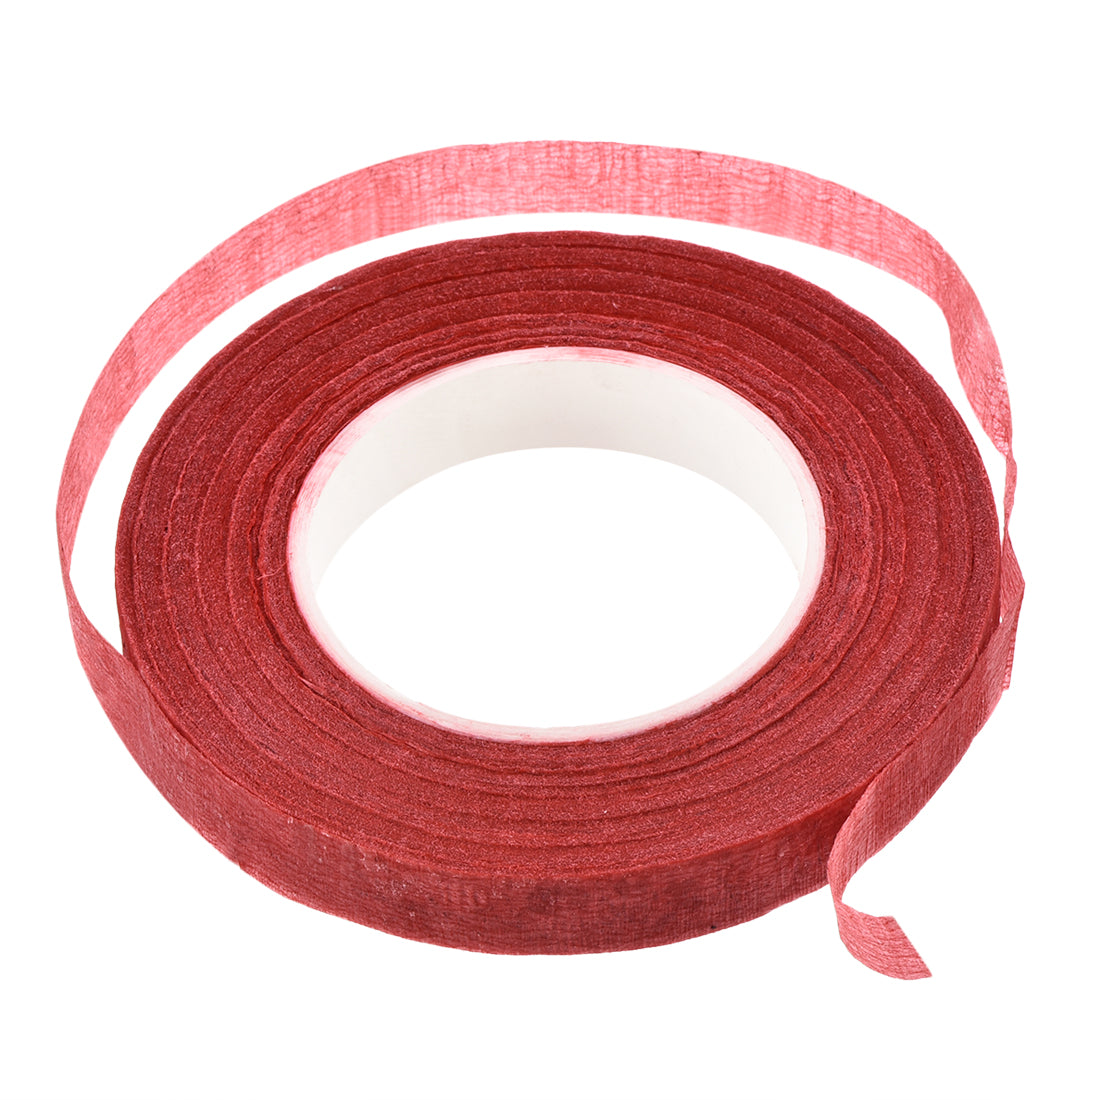 uxcell Uxcell 1Roll 1/2"x30Yard Red Floral Tape Flower Adhesives Floral Arrangement Kit